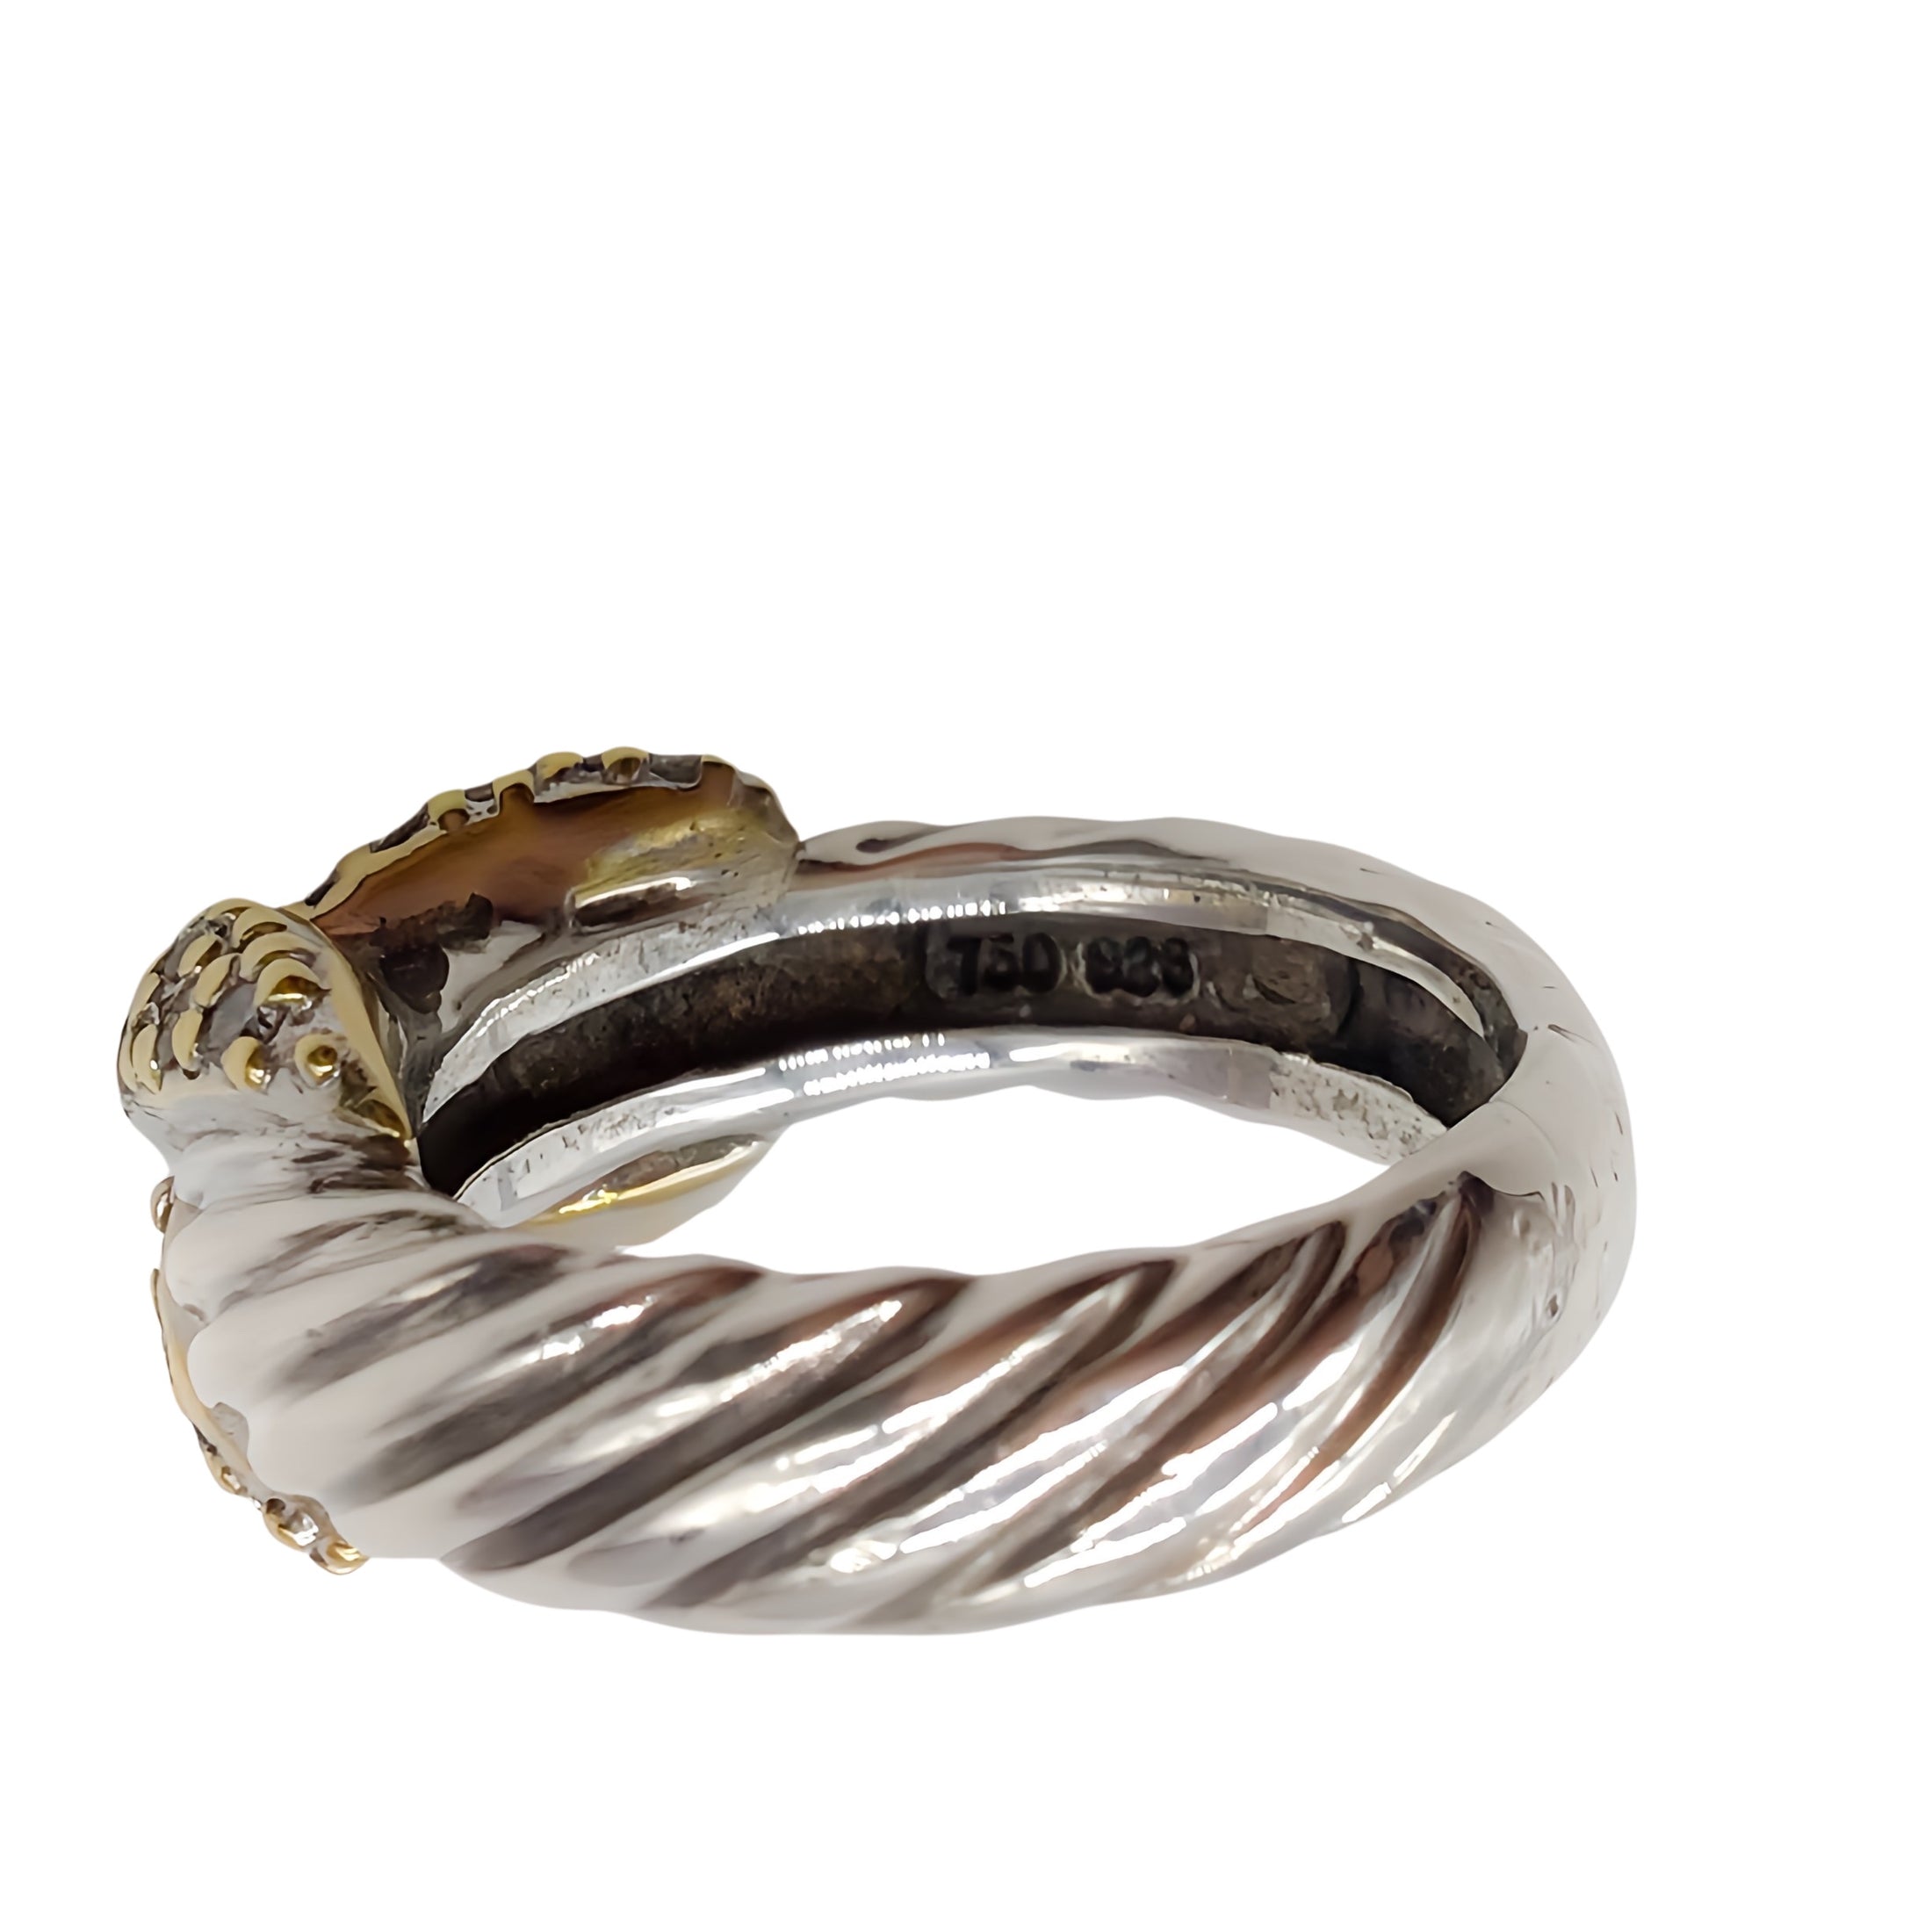 David Yurman 18K White Gold and Sterling X Ring with Diamonds